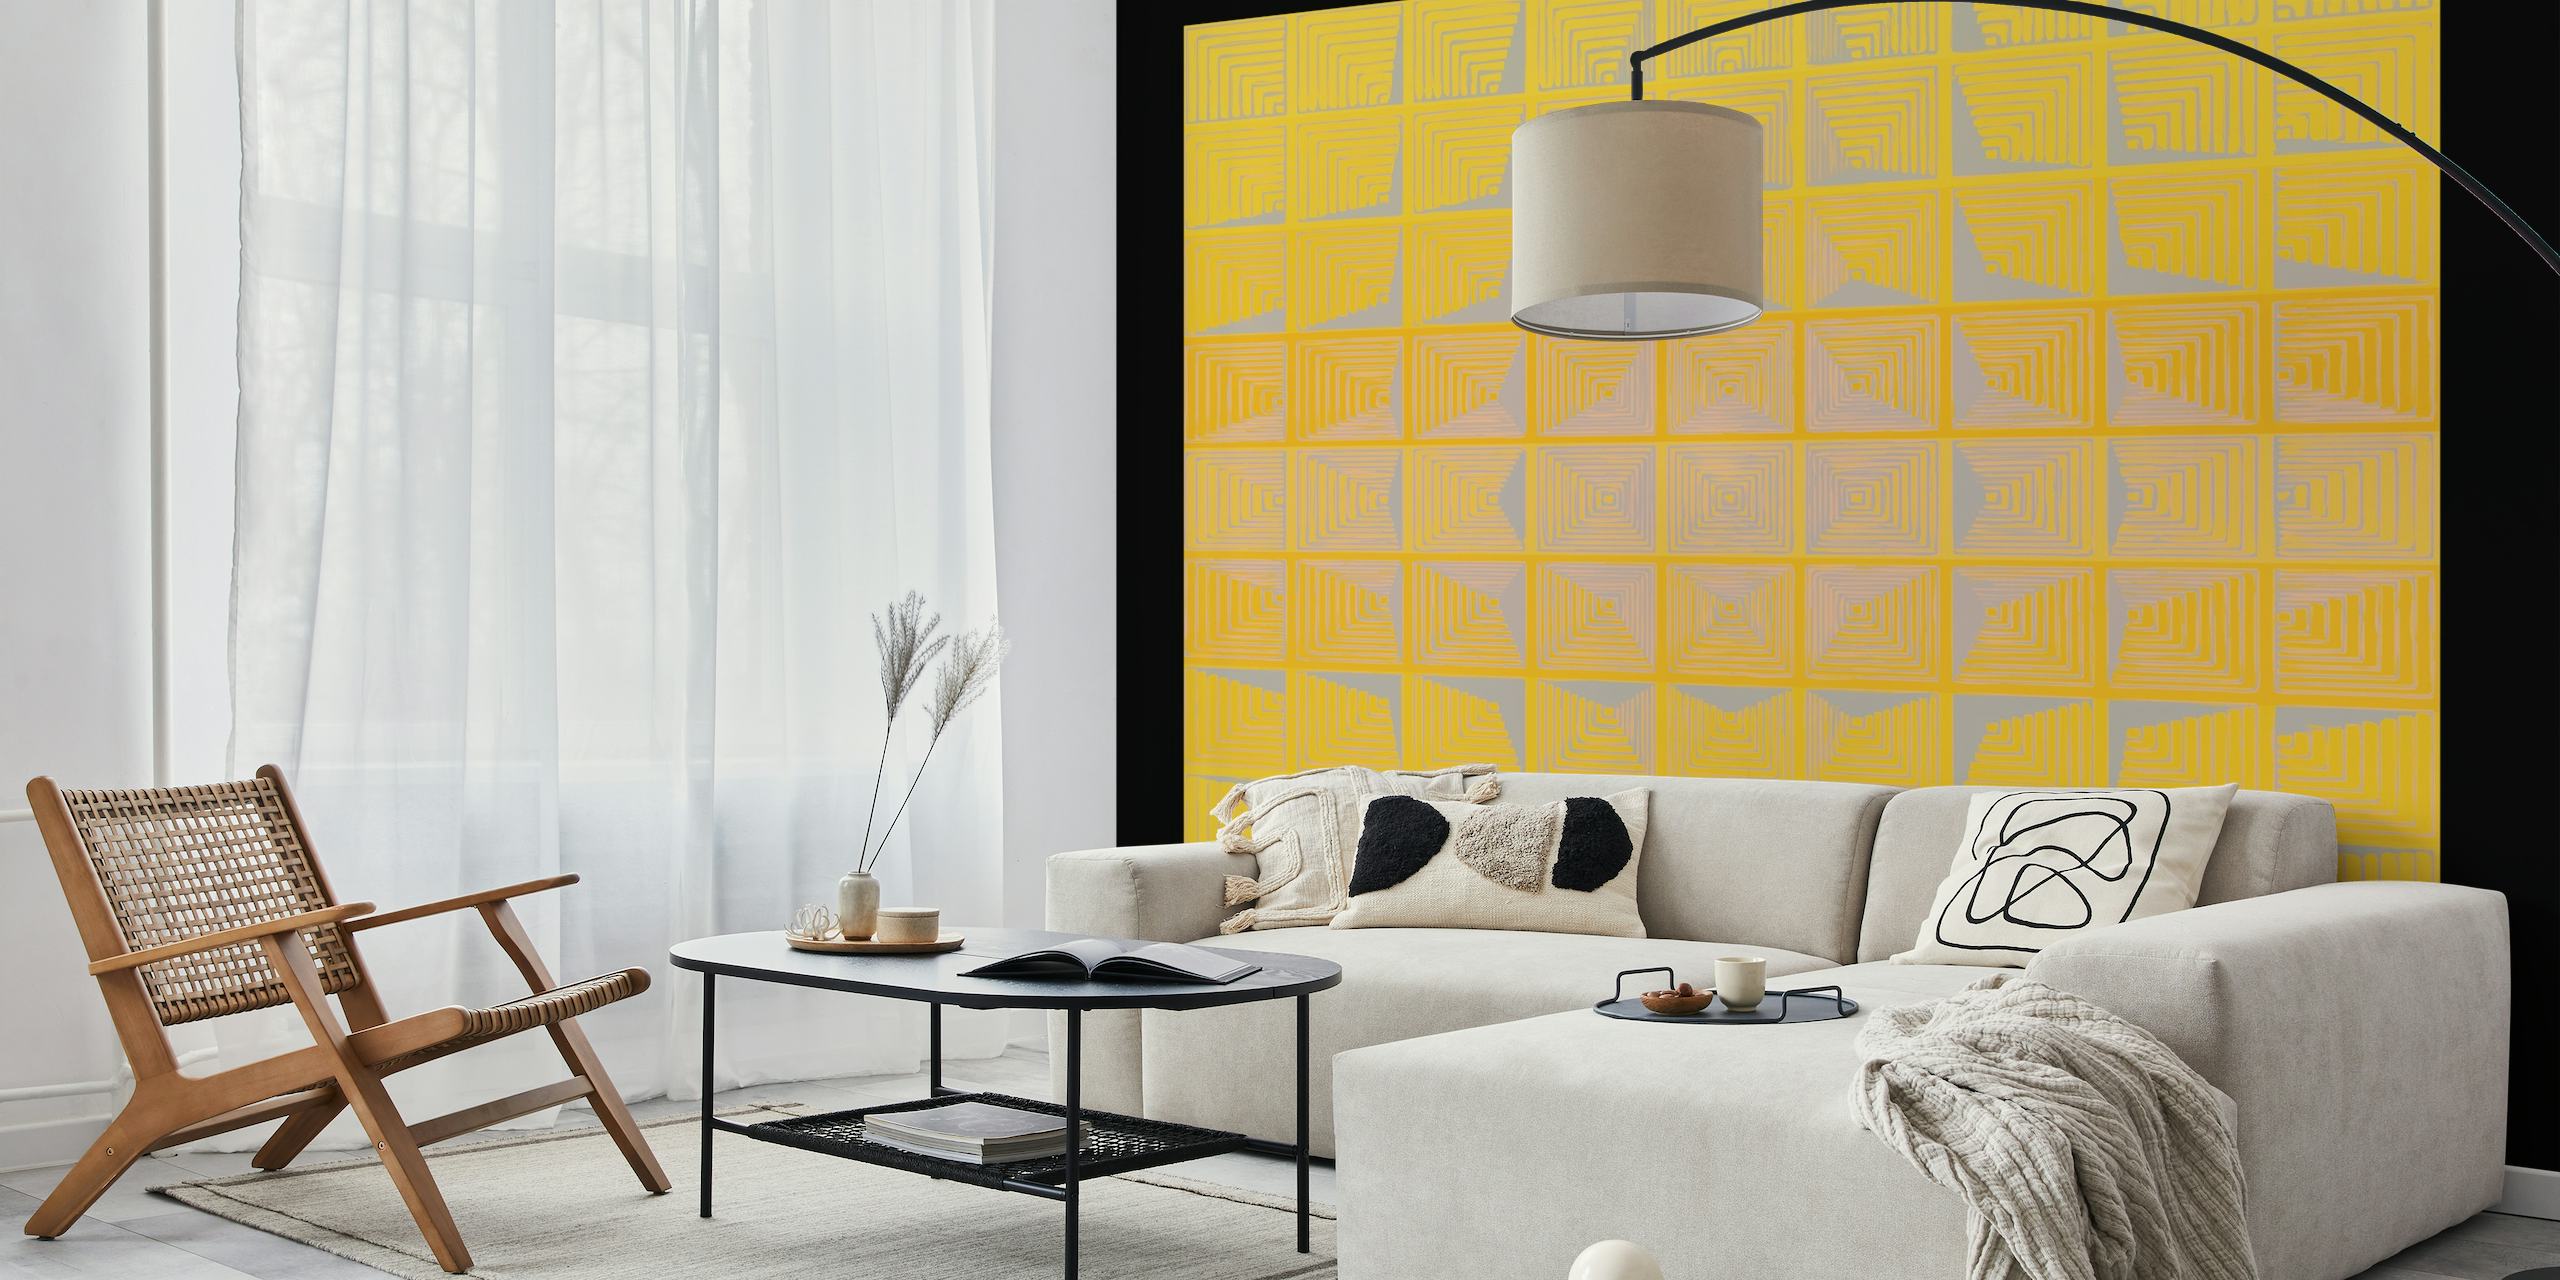 70s inspired geometric pattern wall mural in yellow